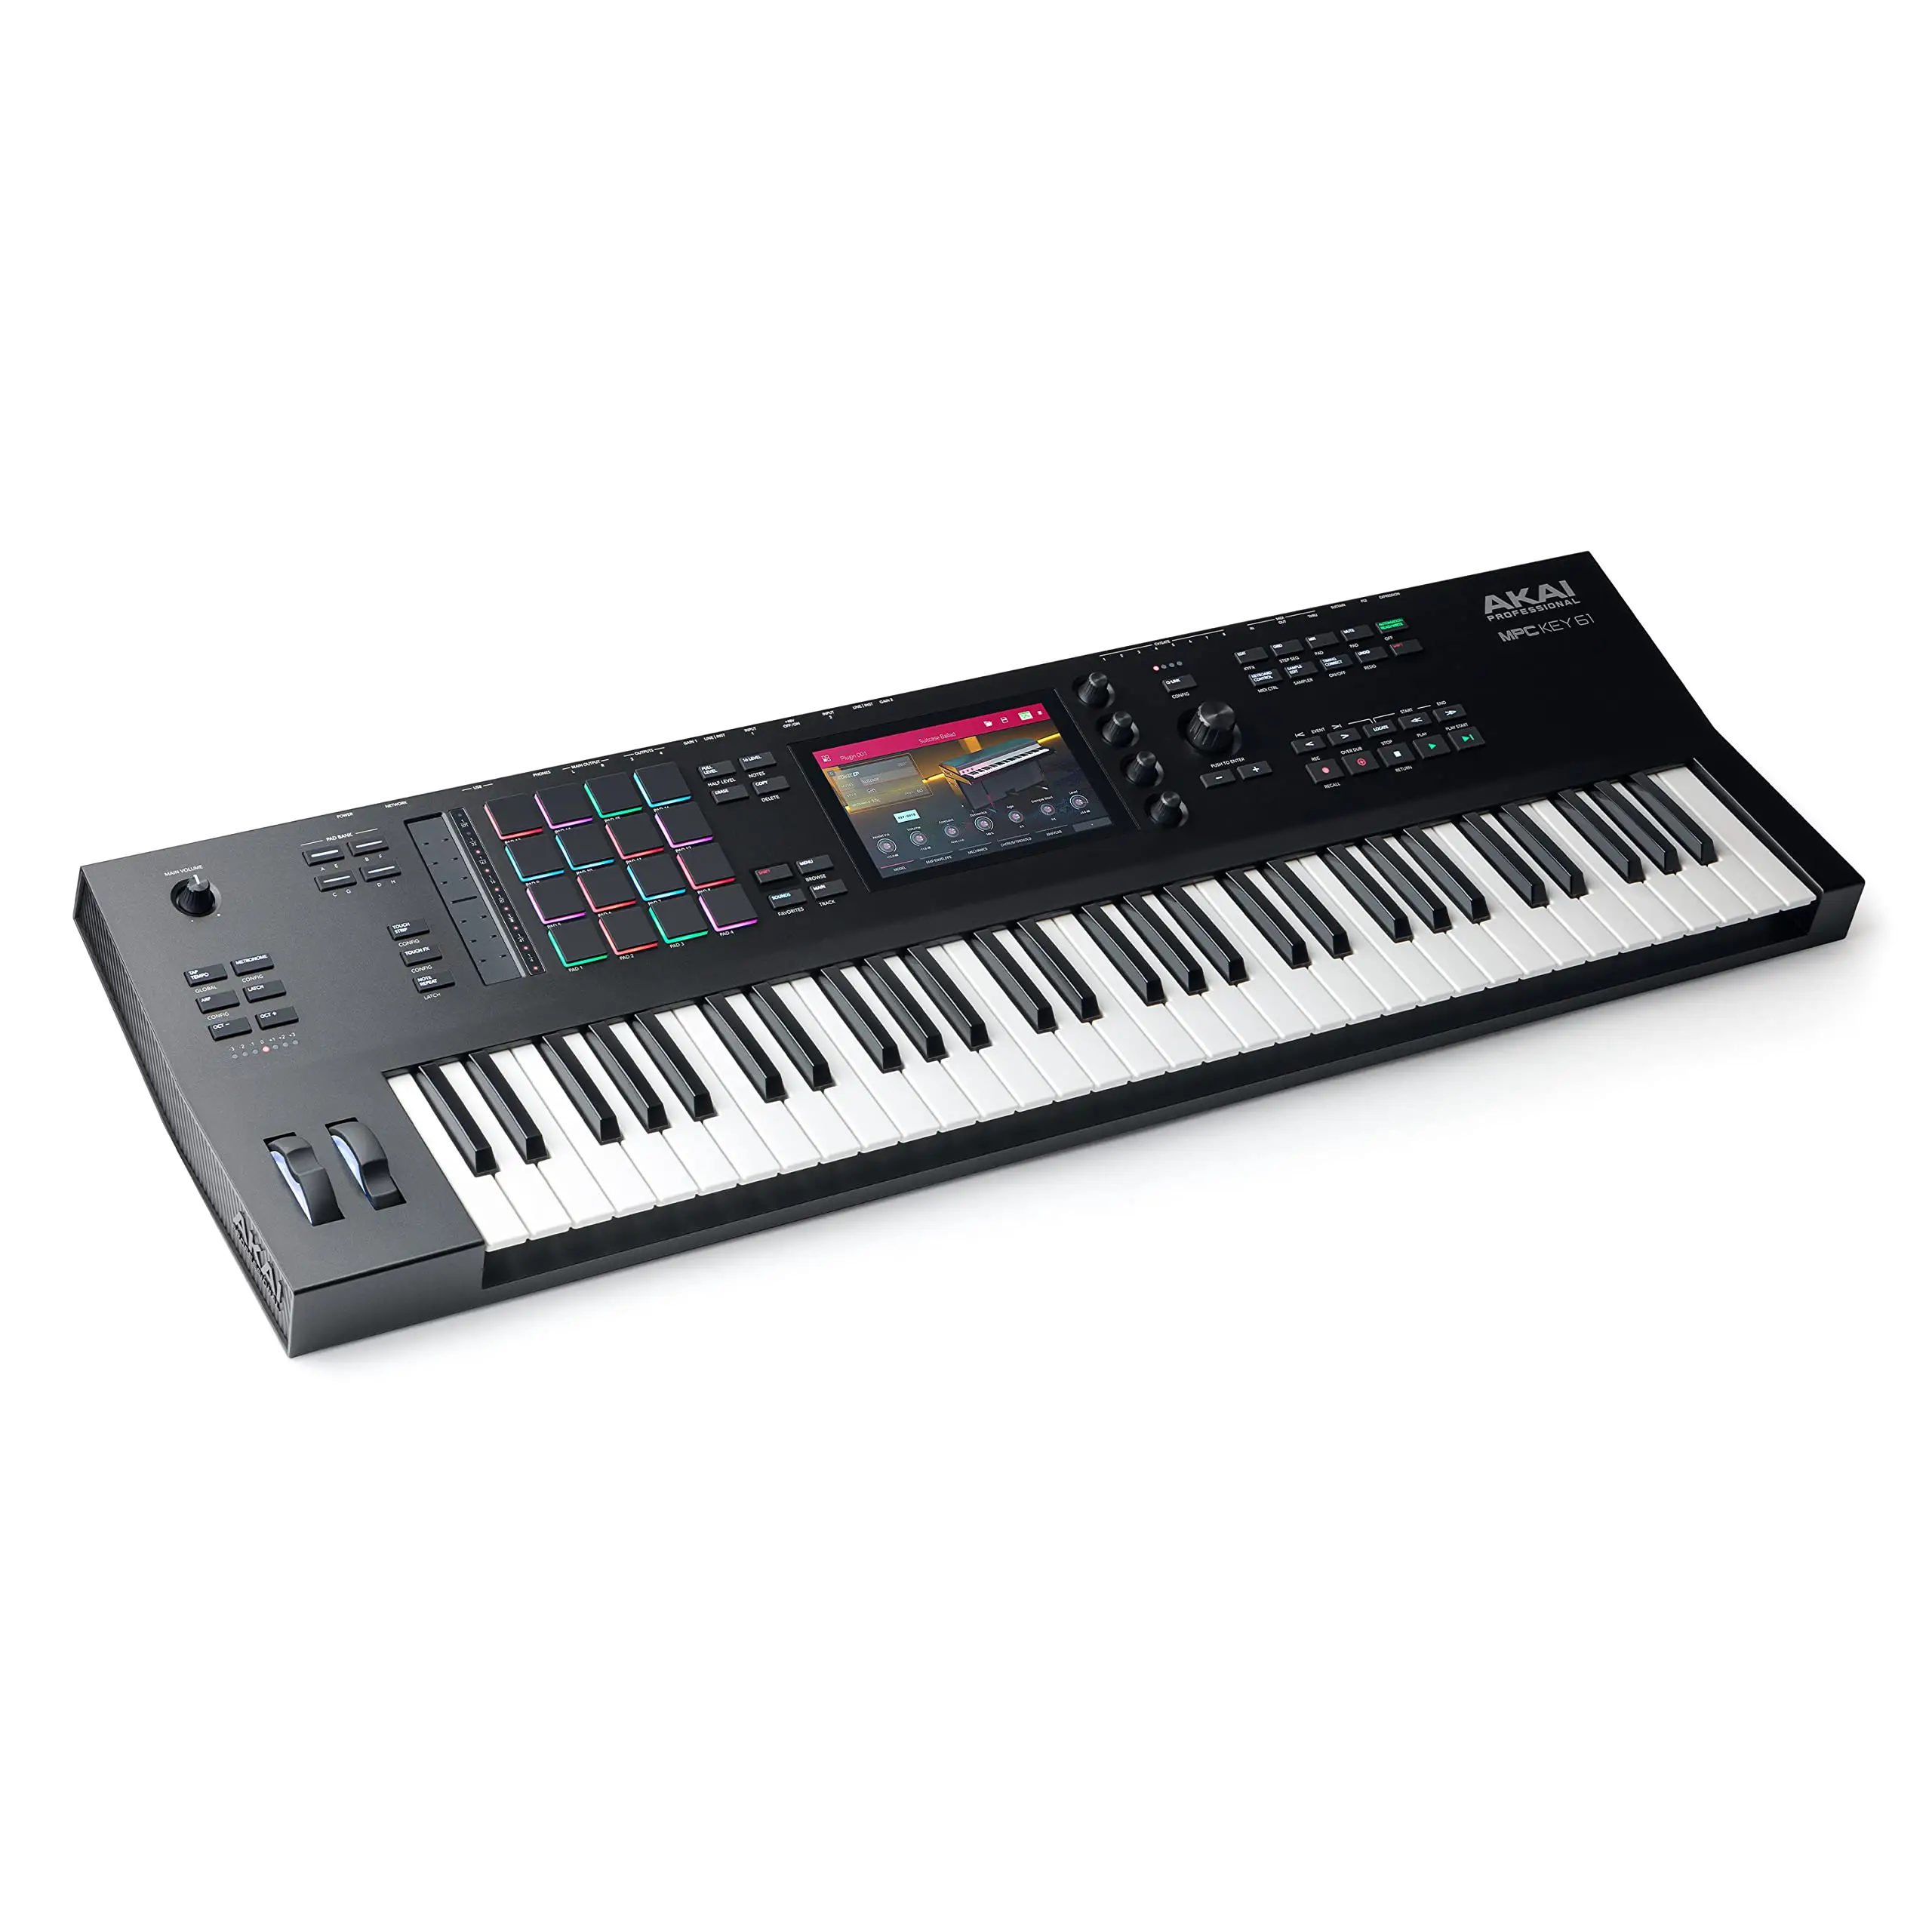 Best price for New AKAIs Professional MPC Key 61 - Standalone Music Production Synthesizer Keyboard